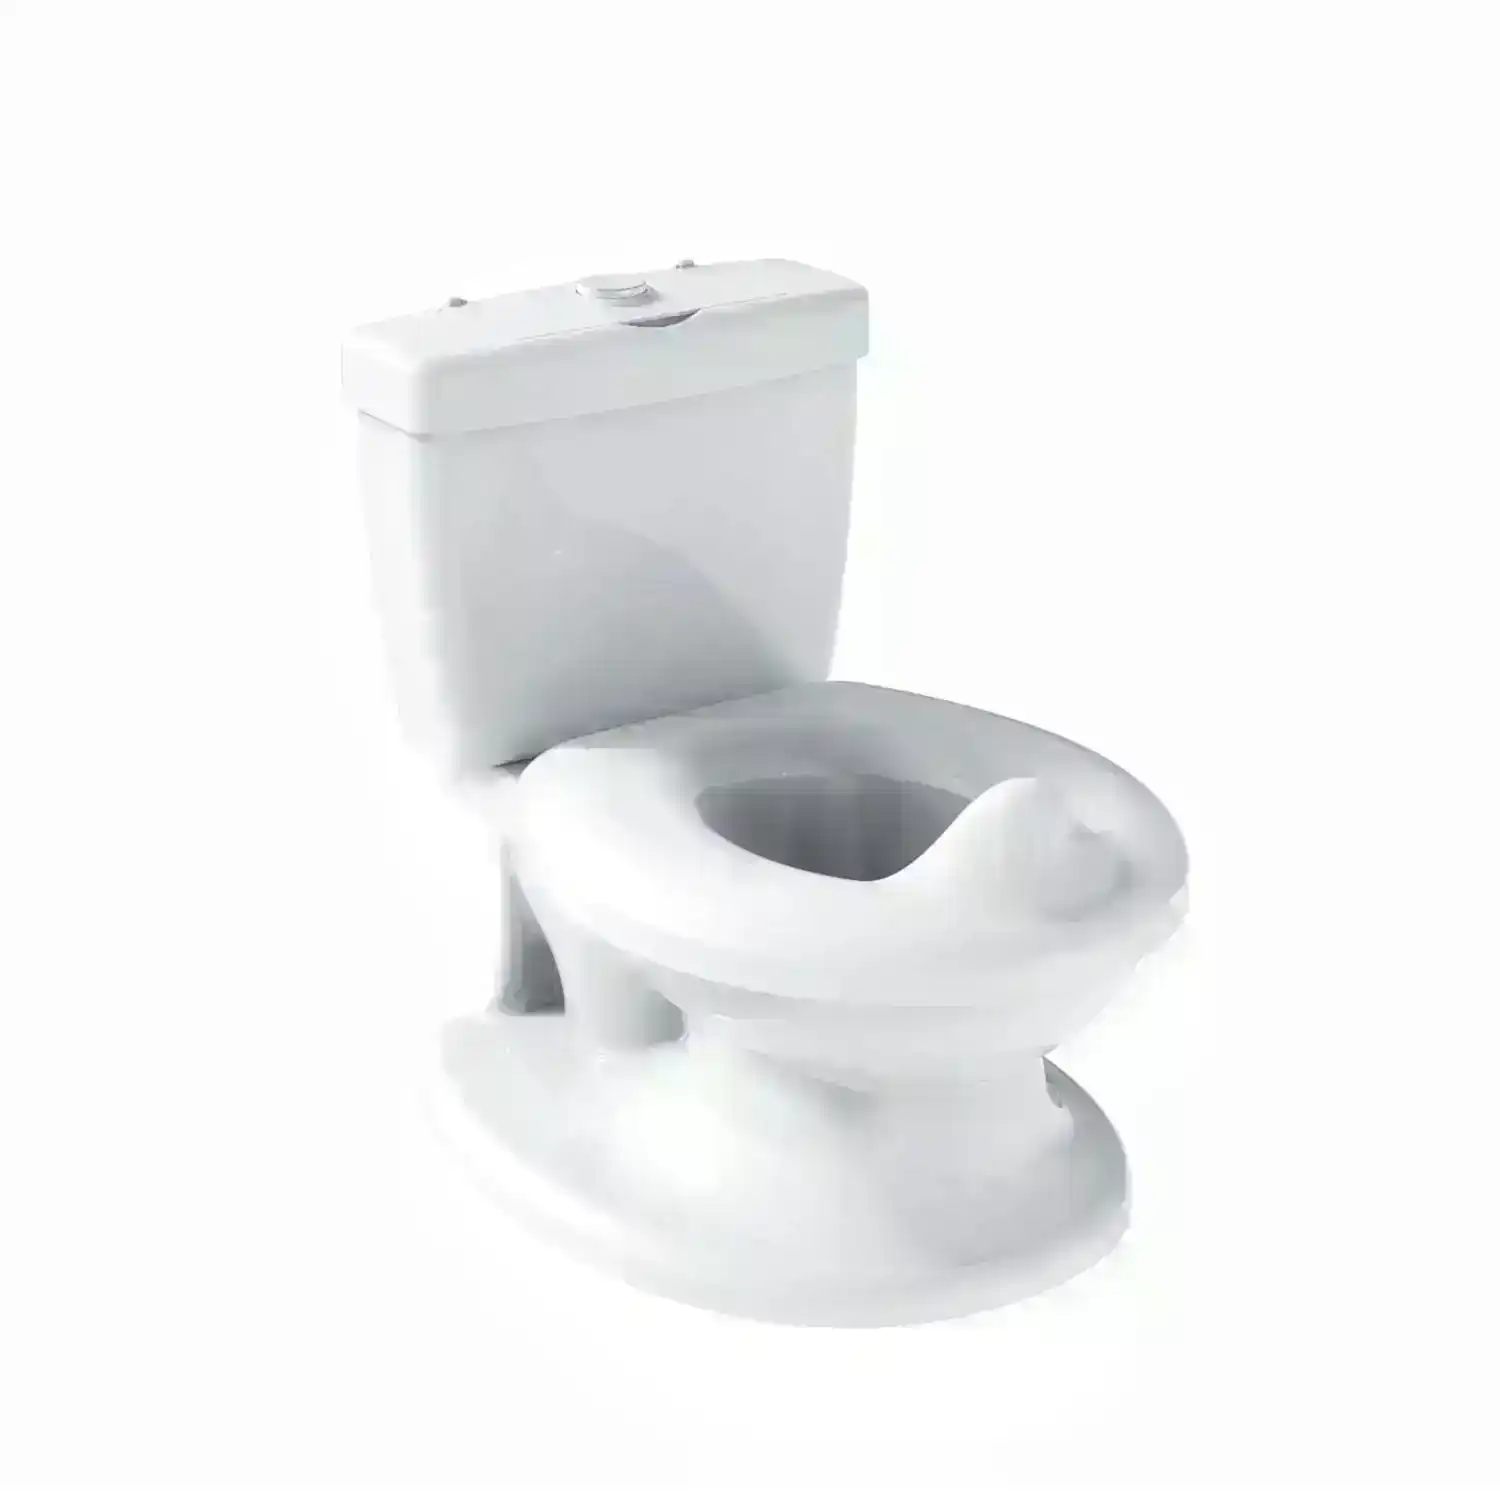 Amirra Children Training Toilet Potty Seat for Baby Kids and Toddlers White